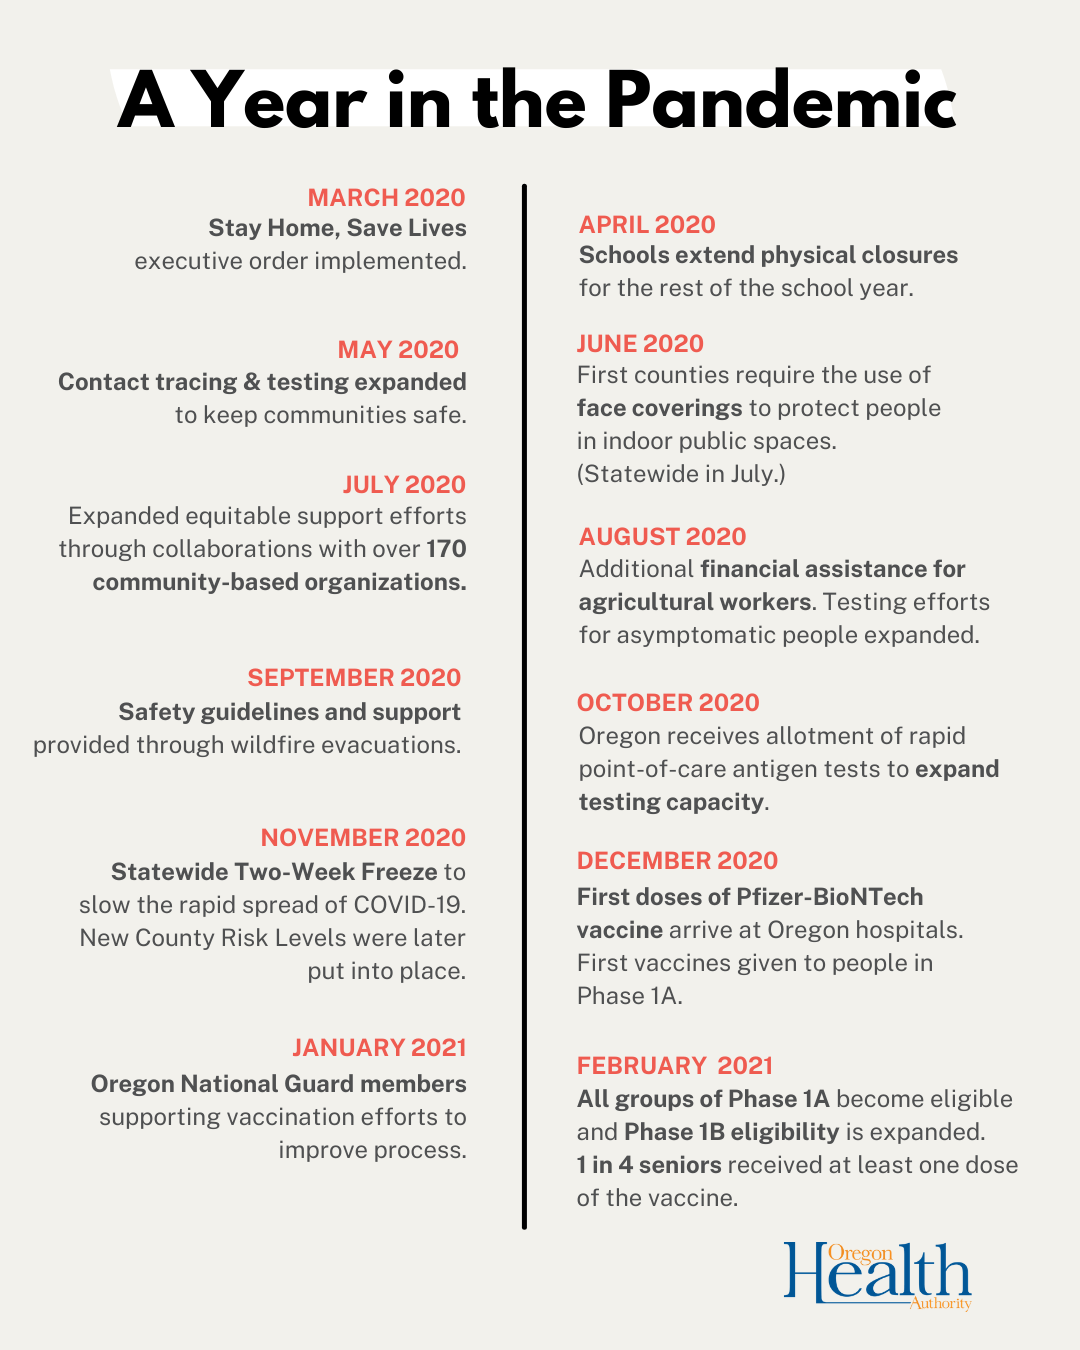 Year of the pandemic timeline